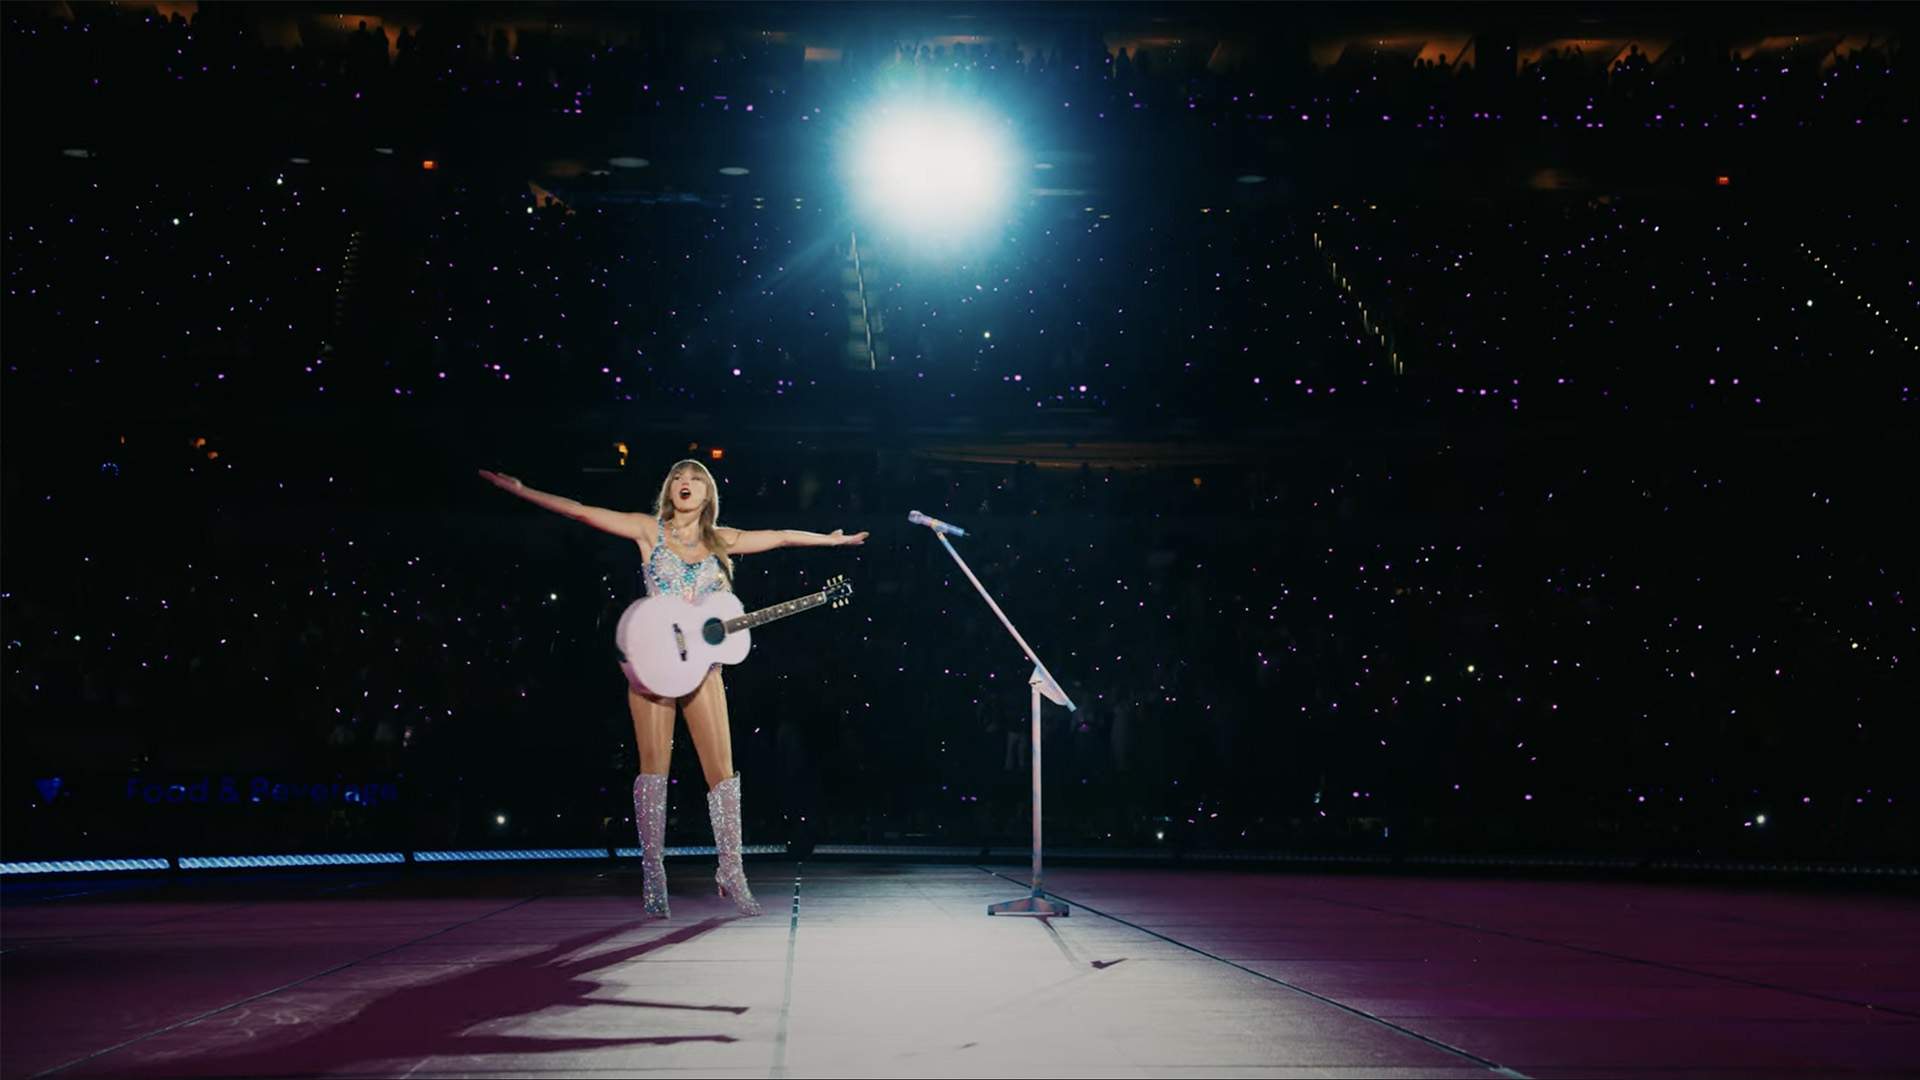 Taylor Swift's 'Eras' Tour Concert Film Will Hit Cinemas Down Under in October If You're Ready for It